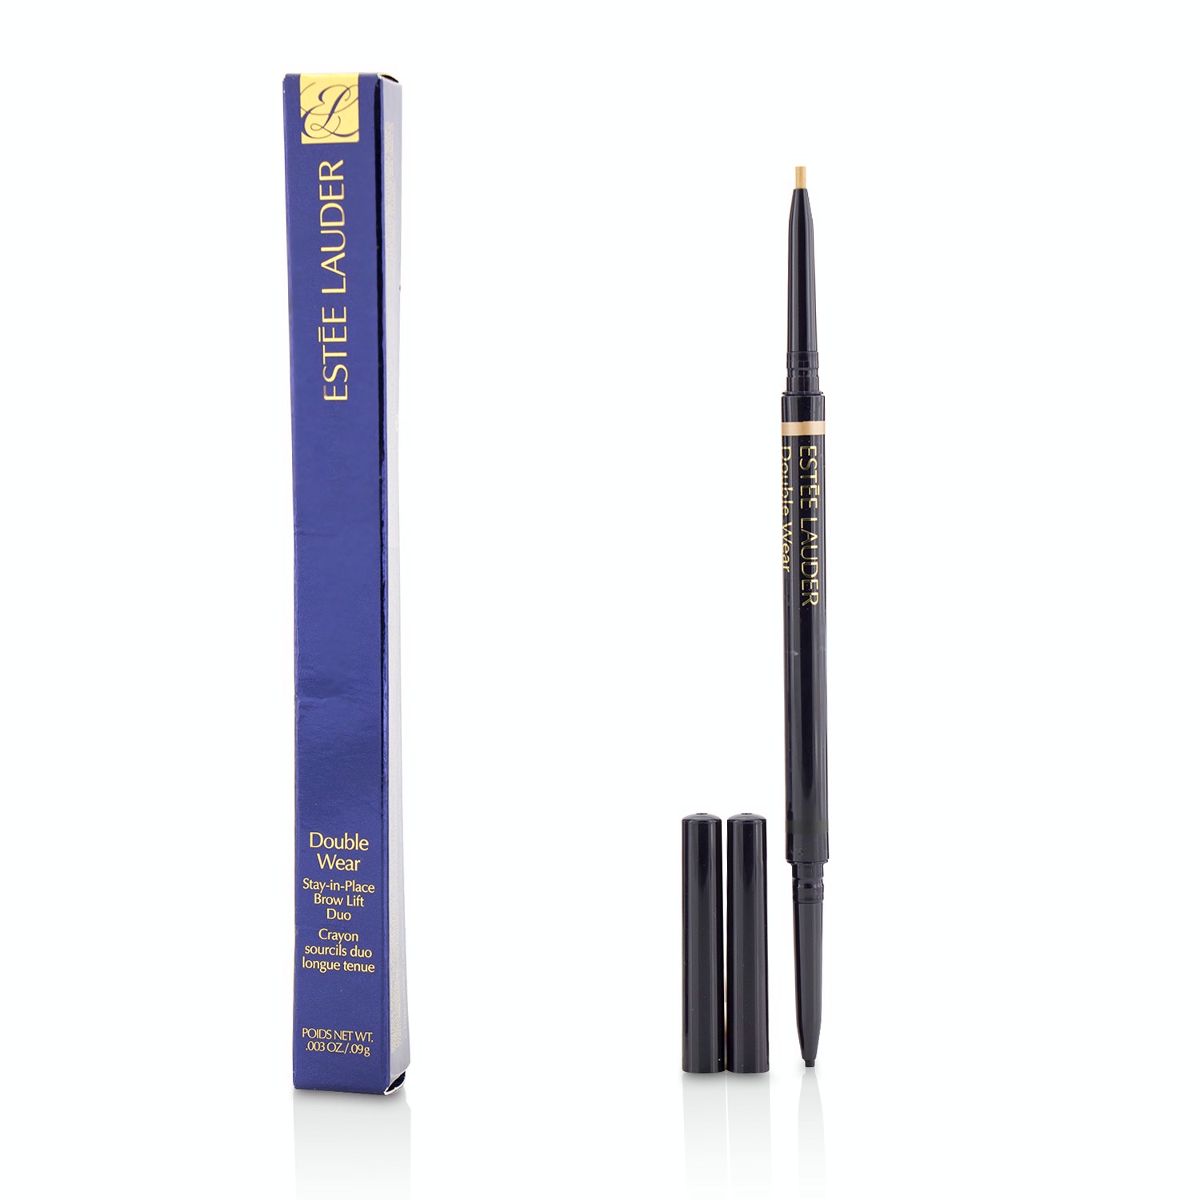 Double Wear Stay In Place Brow Lift Duo - # 05 Highlight/Black Estee Lauder Image